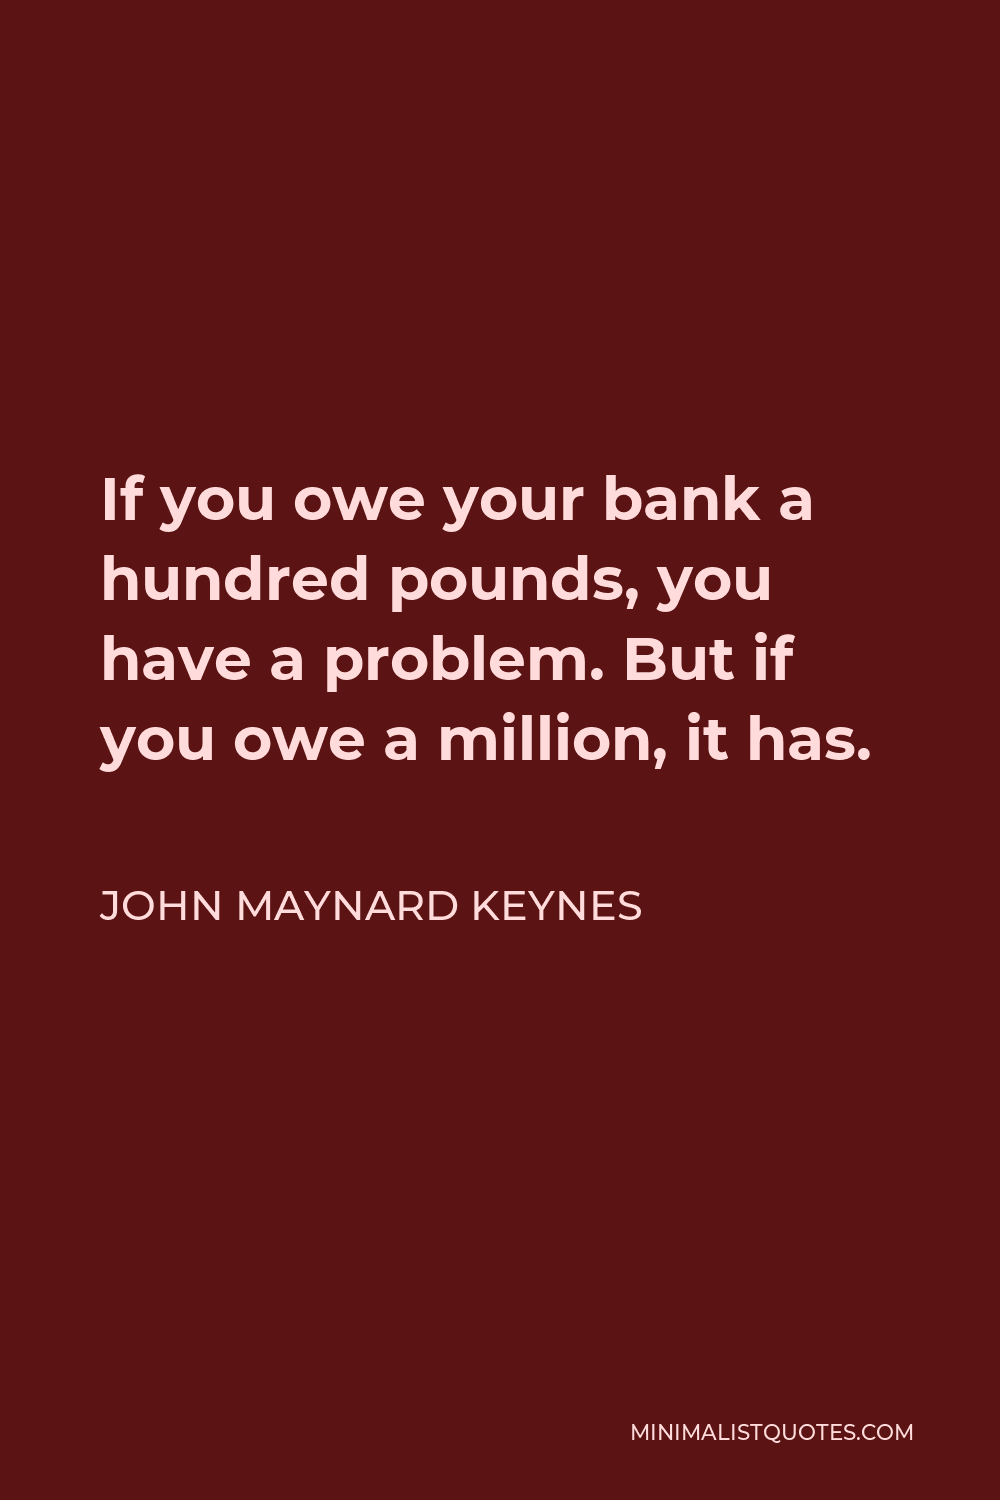 John Maynard Keynes Quote - If you owe your bank a hundred pounds, you have a problem. But if you owe a million, it has.